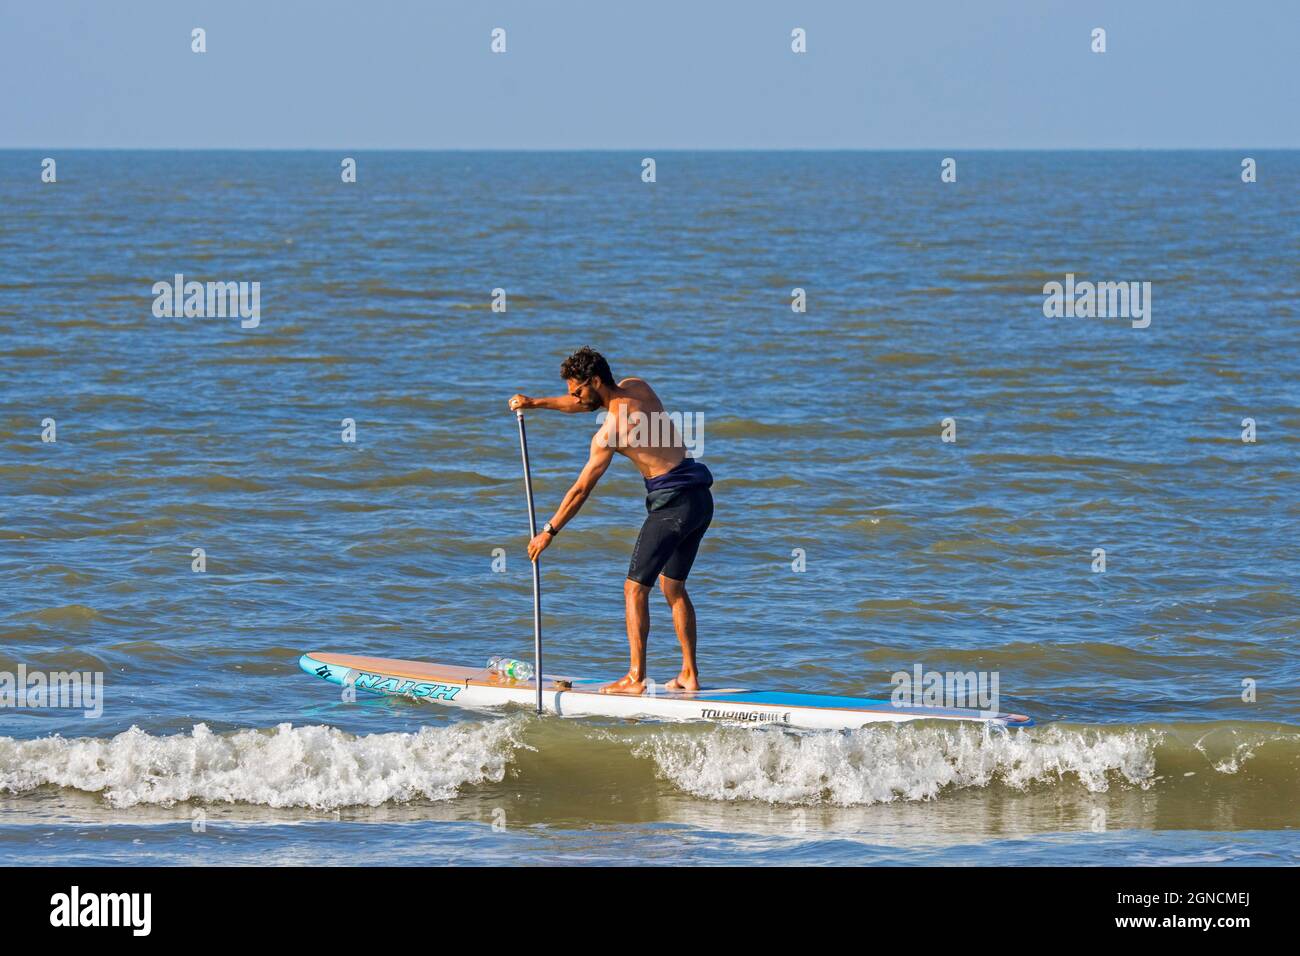 Male paddleboarder practicing the water sport standup paddleboarding / stand up paddle boarding / SUP along the North Sea coast Stock Photo